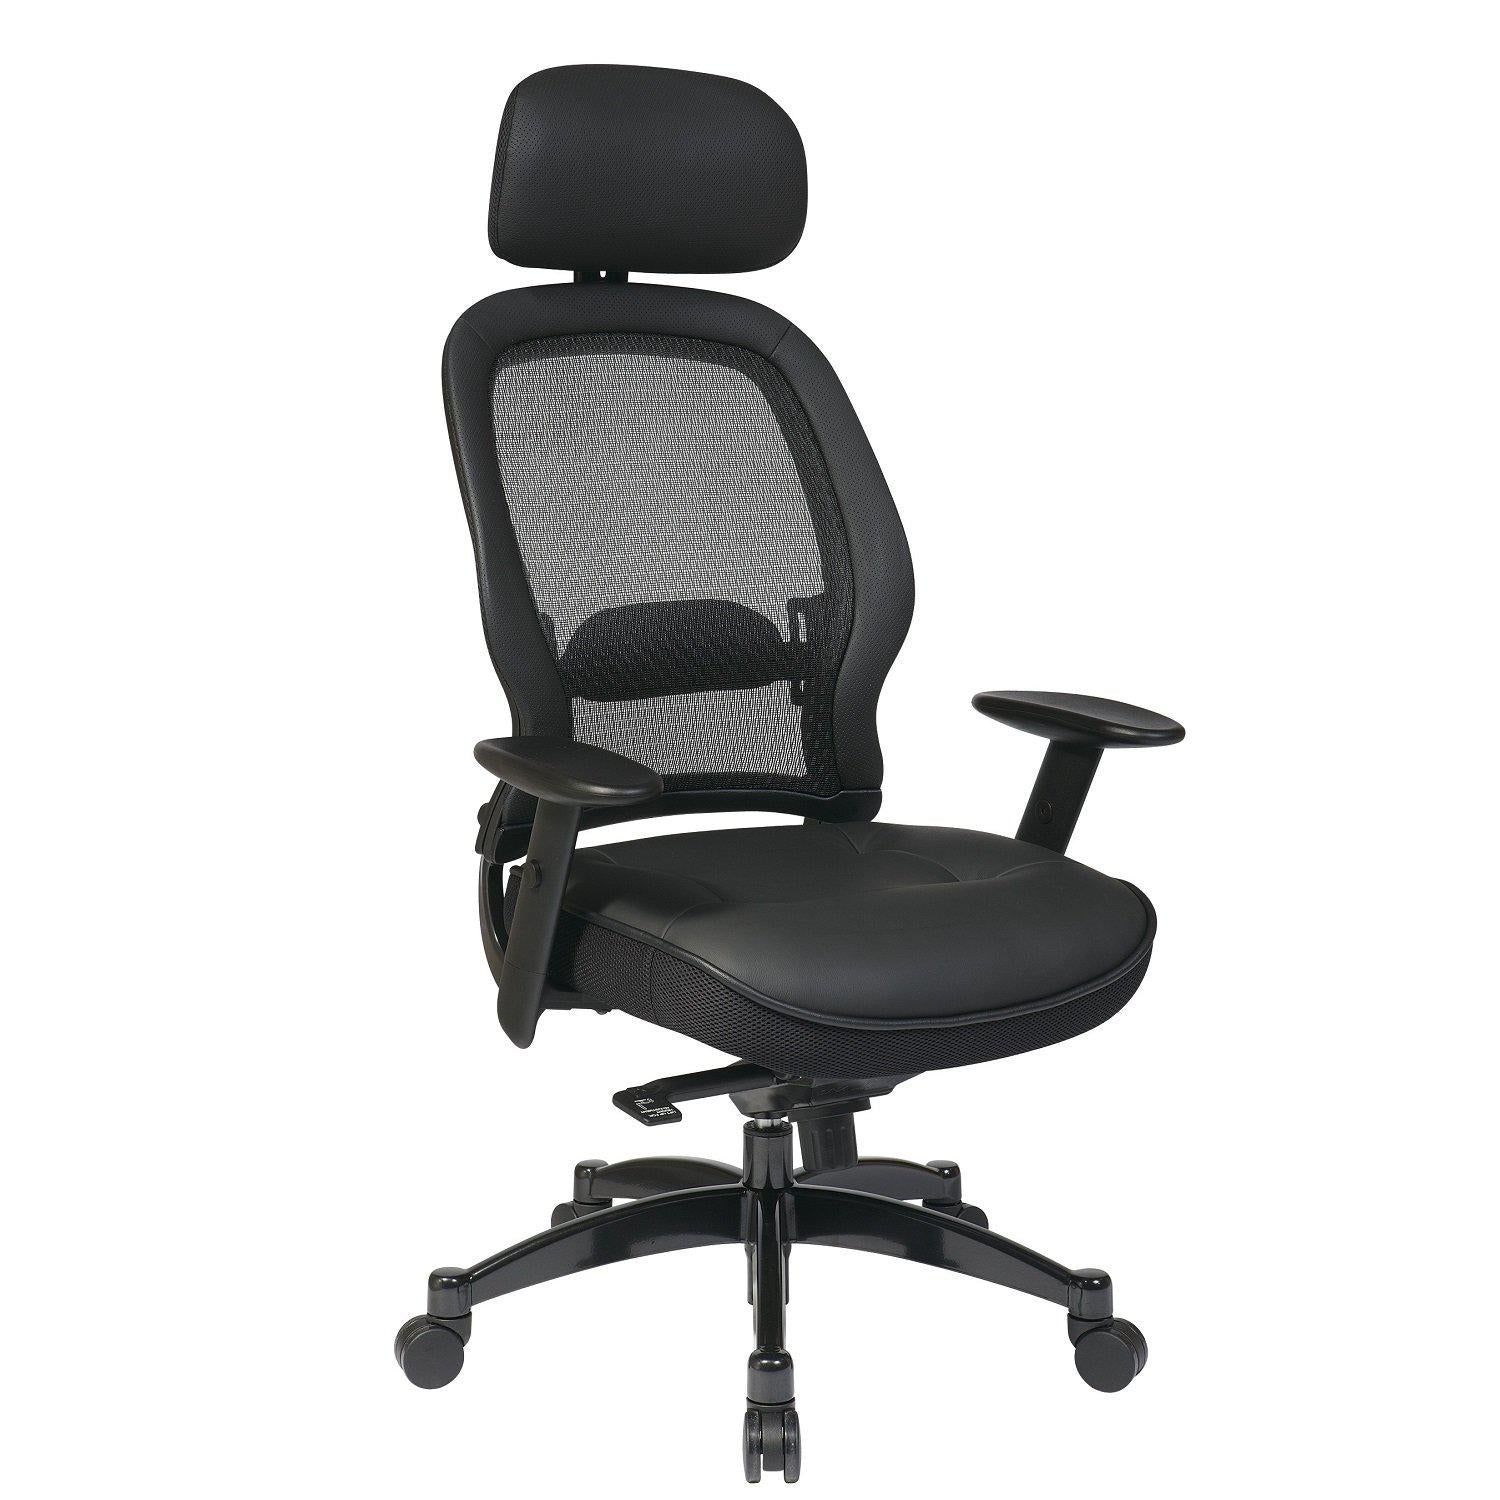 Breathable Mesh Back Manager's Chair with Black Leather Seat and Adjustable Headrest